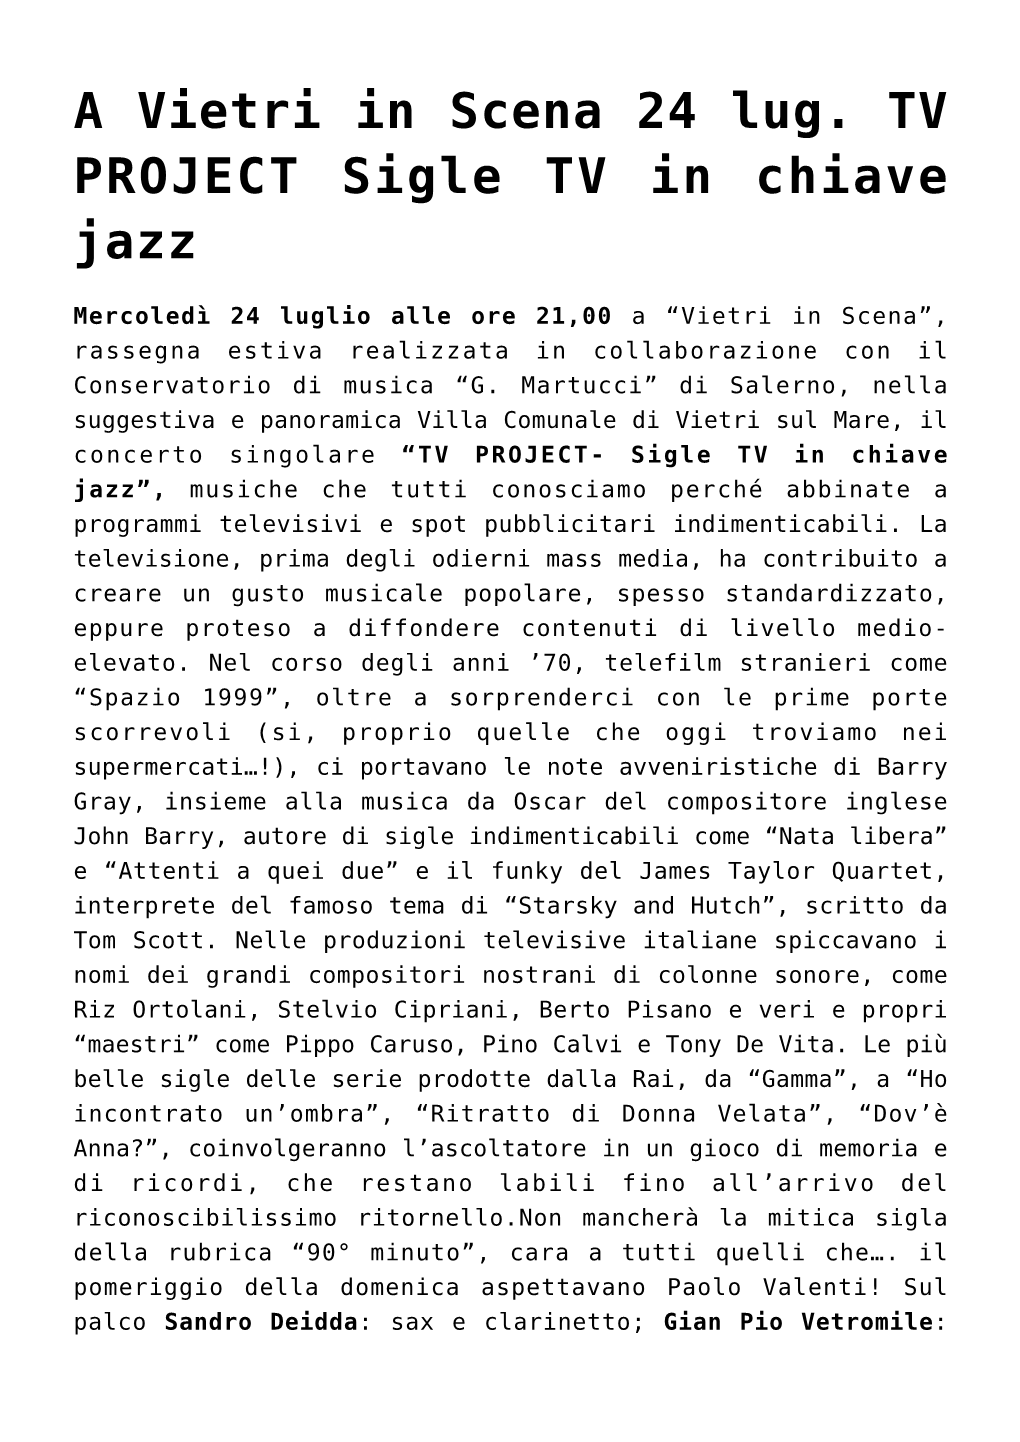 A Vietri in Scena 24 Lug. TV PROJECT Sigle TV in Chiave Jazz